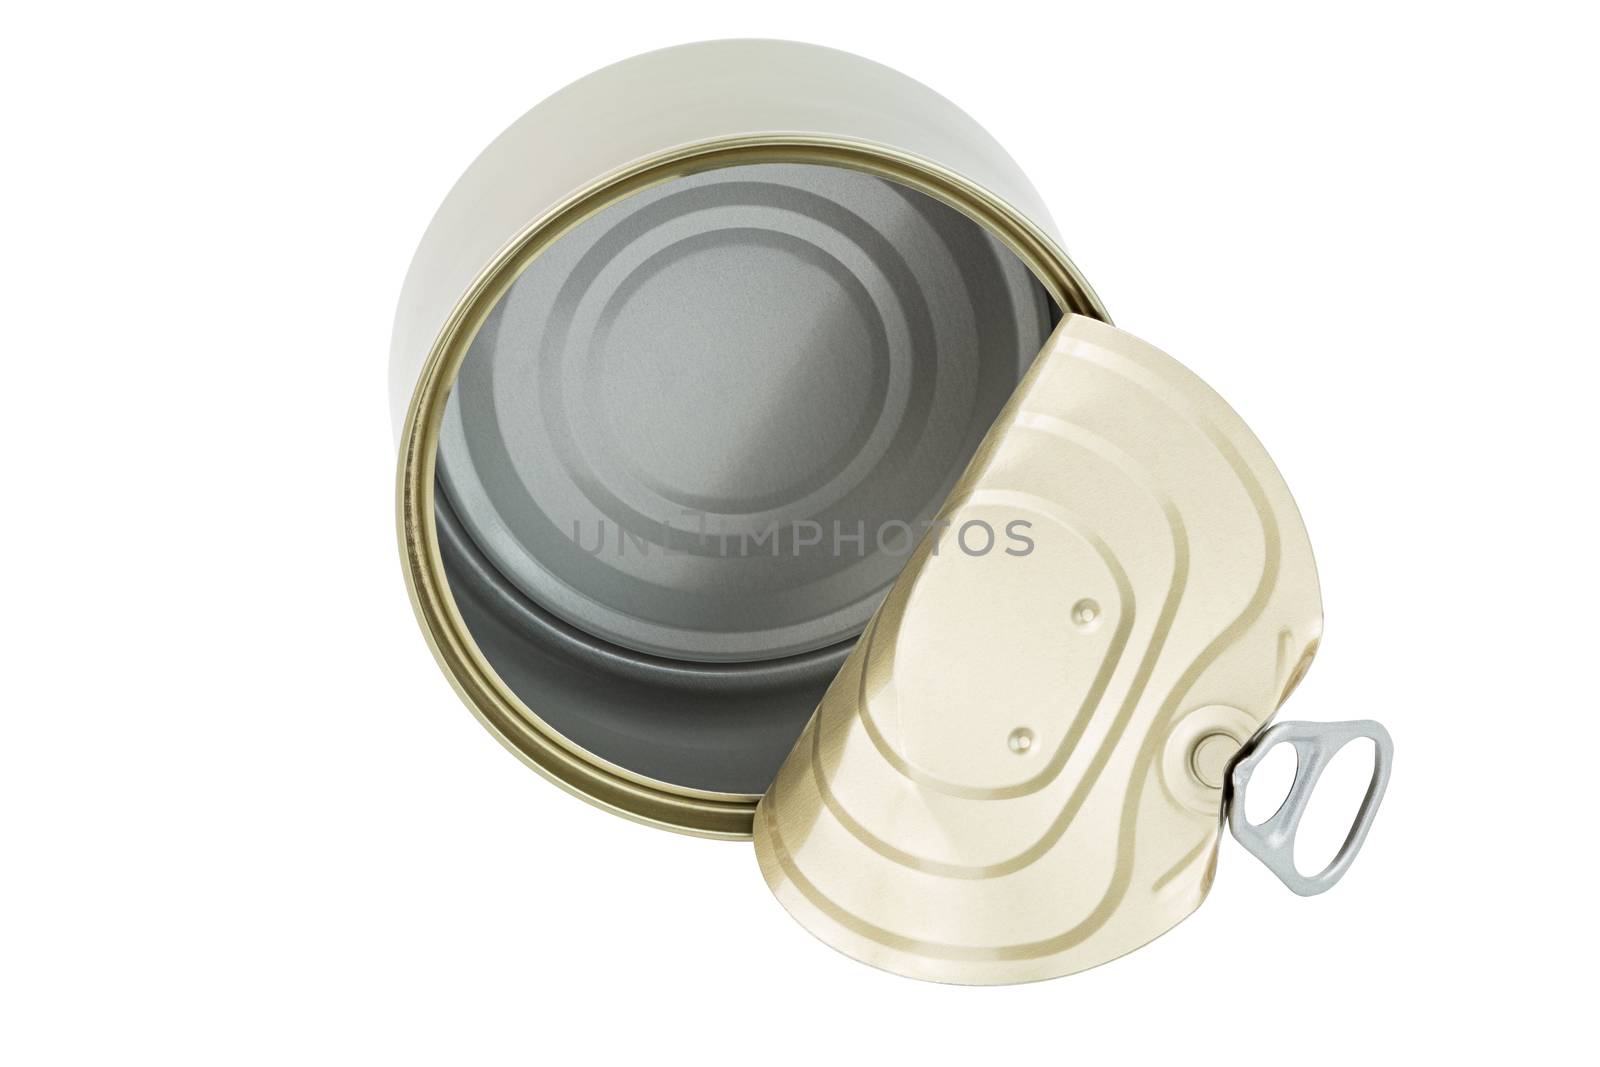 opened clean tin can with pull tab ring, bended lid and empty - isolated on white, top-down view by z1b